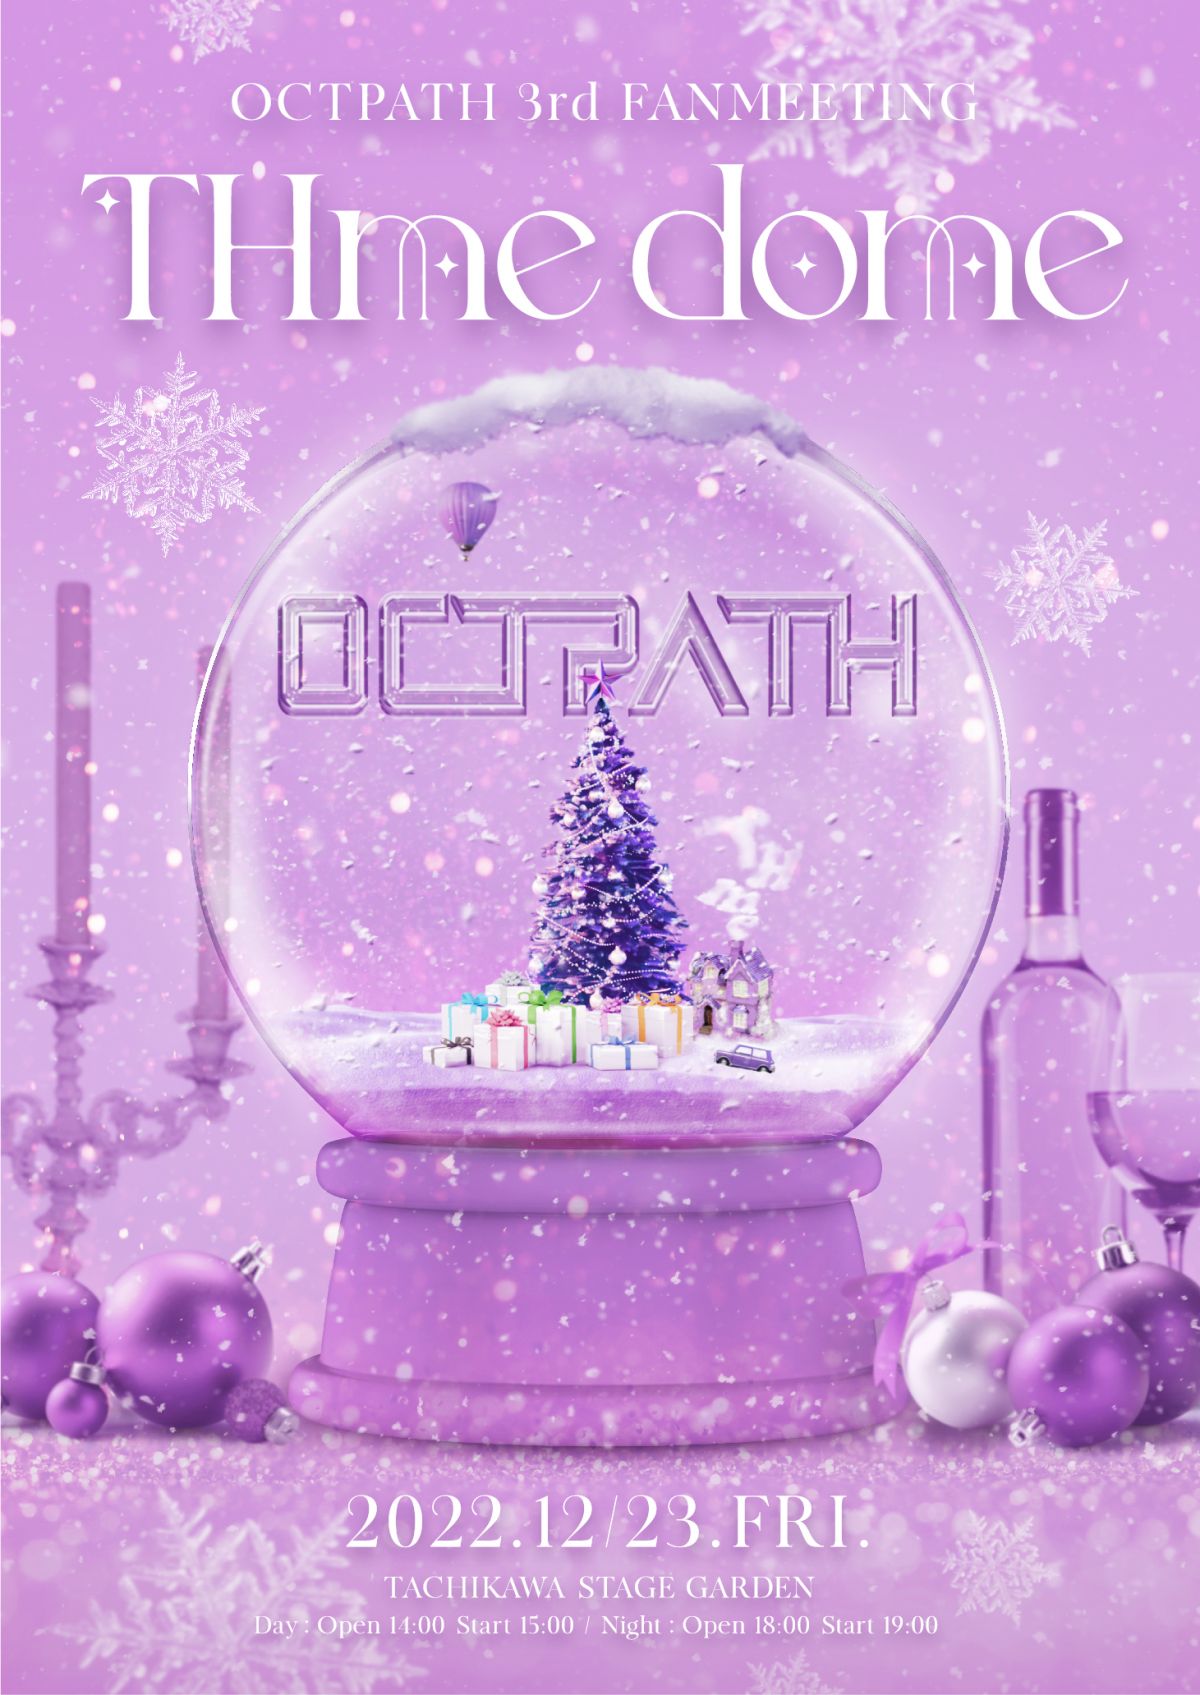 「OCTPATH 3rd FANMEETING THme dome」FC会員先行チケット2次受付開始！